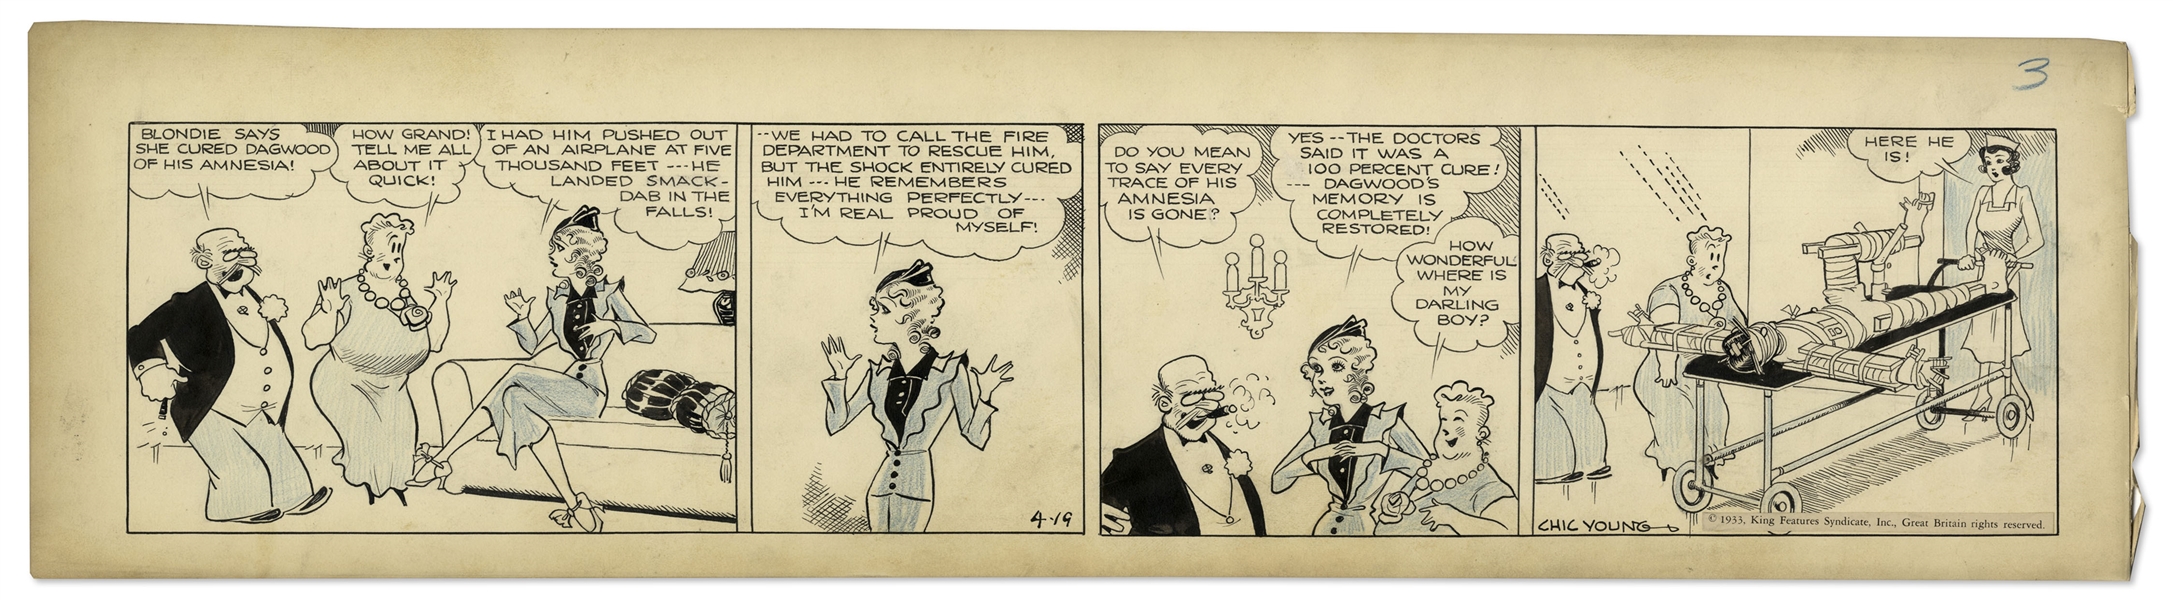 Chic Young Hand-Drawn ''Blondie'' Comic Strip From 1933 Titled ''The Perfect Wreck'' -- Blondie Cures Dagwood's Amnesia by Pushing Him Out of an Airplane